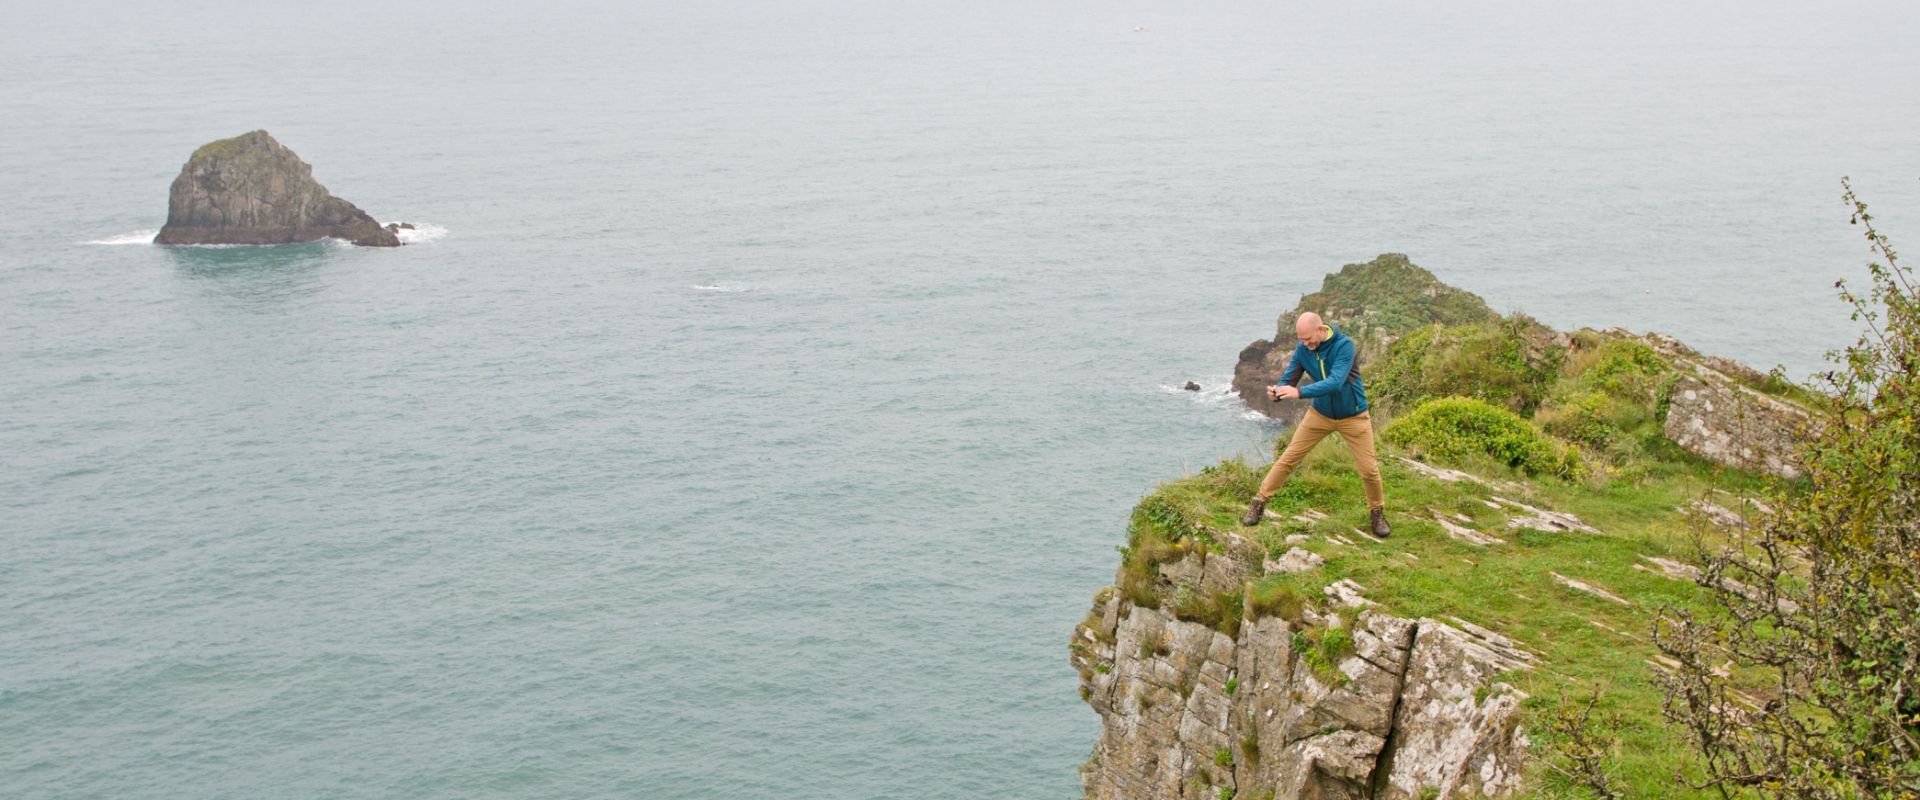 Guest looking over the cliffs into the sea below at Berry Head near Brixham